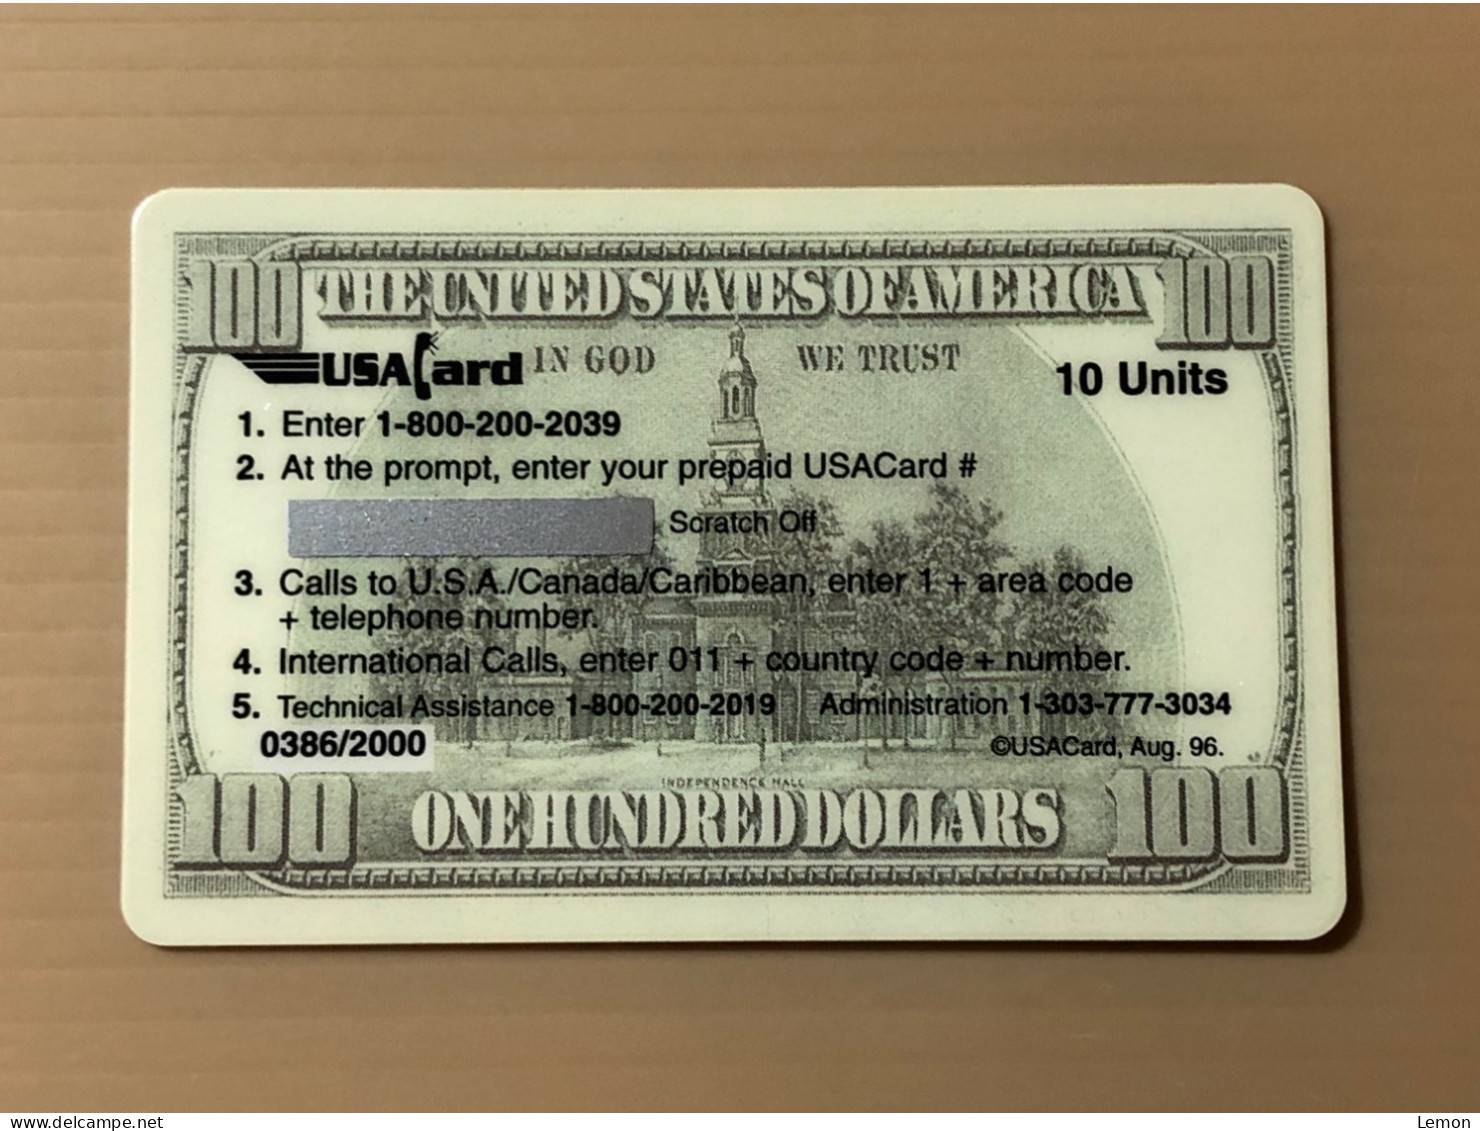 Mint USA UNITED STATES America Prepaid Telecard Phonecard, Banknote One Hundred Dollar Currency, Set Of 1 Mint Card - Colecciones